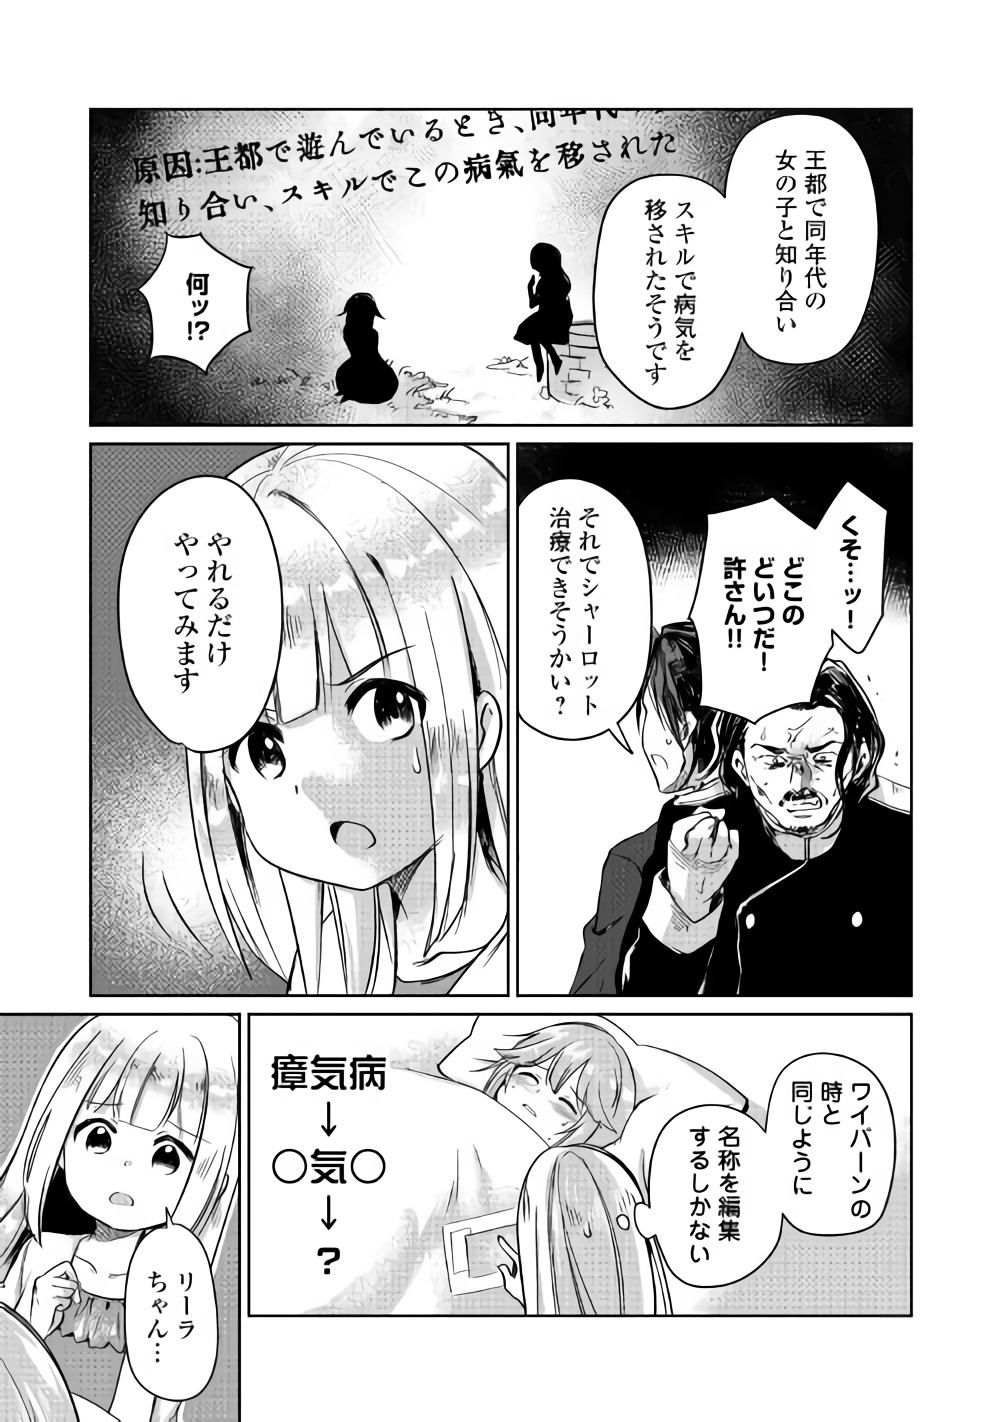 The Former Structural Researcher’s Story of Otherworldly Adventure 第4話 - Page 29